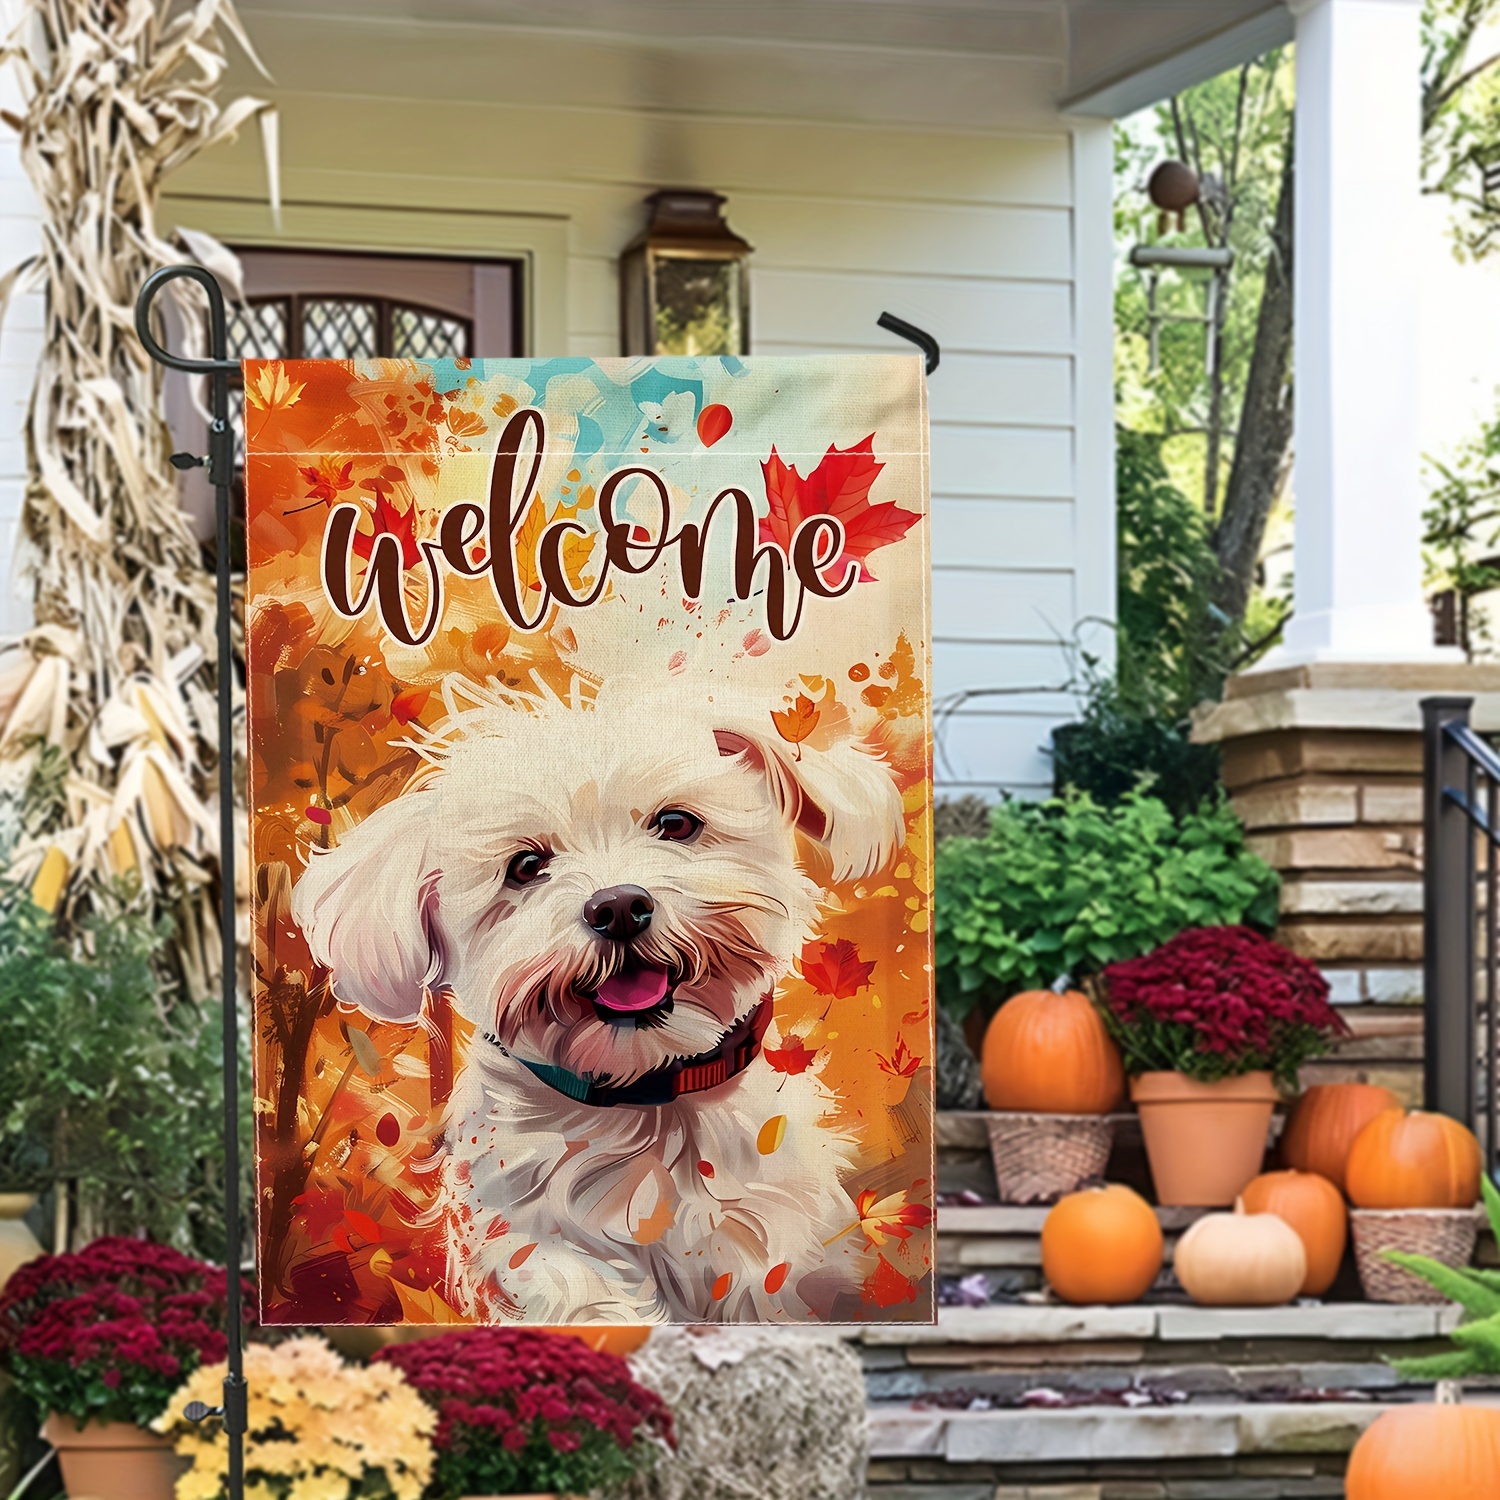 

Autumn Welcome Garden Flag - Durable Polyester Fabric, Double-sided Cute Dog & Maple Leaf Design, Linen Texture, No Power Needed, Ideal For Outdoor Patio & Garden Decor (12" X 18") - 1 Pack